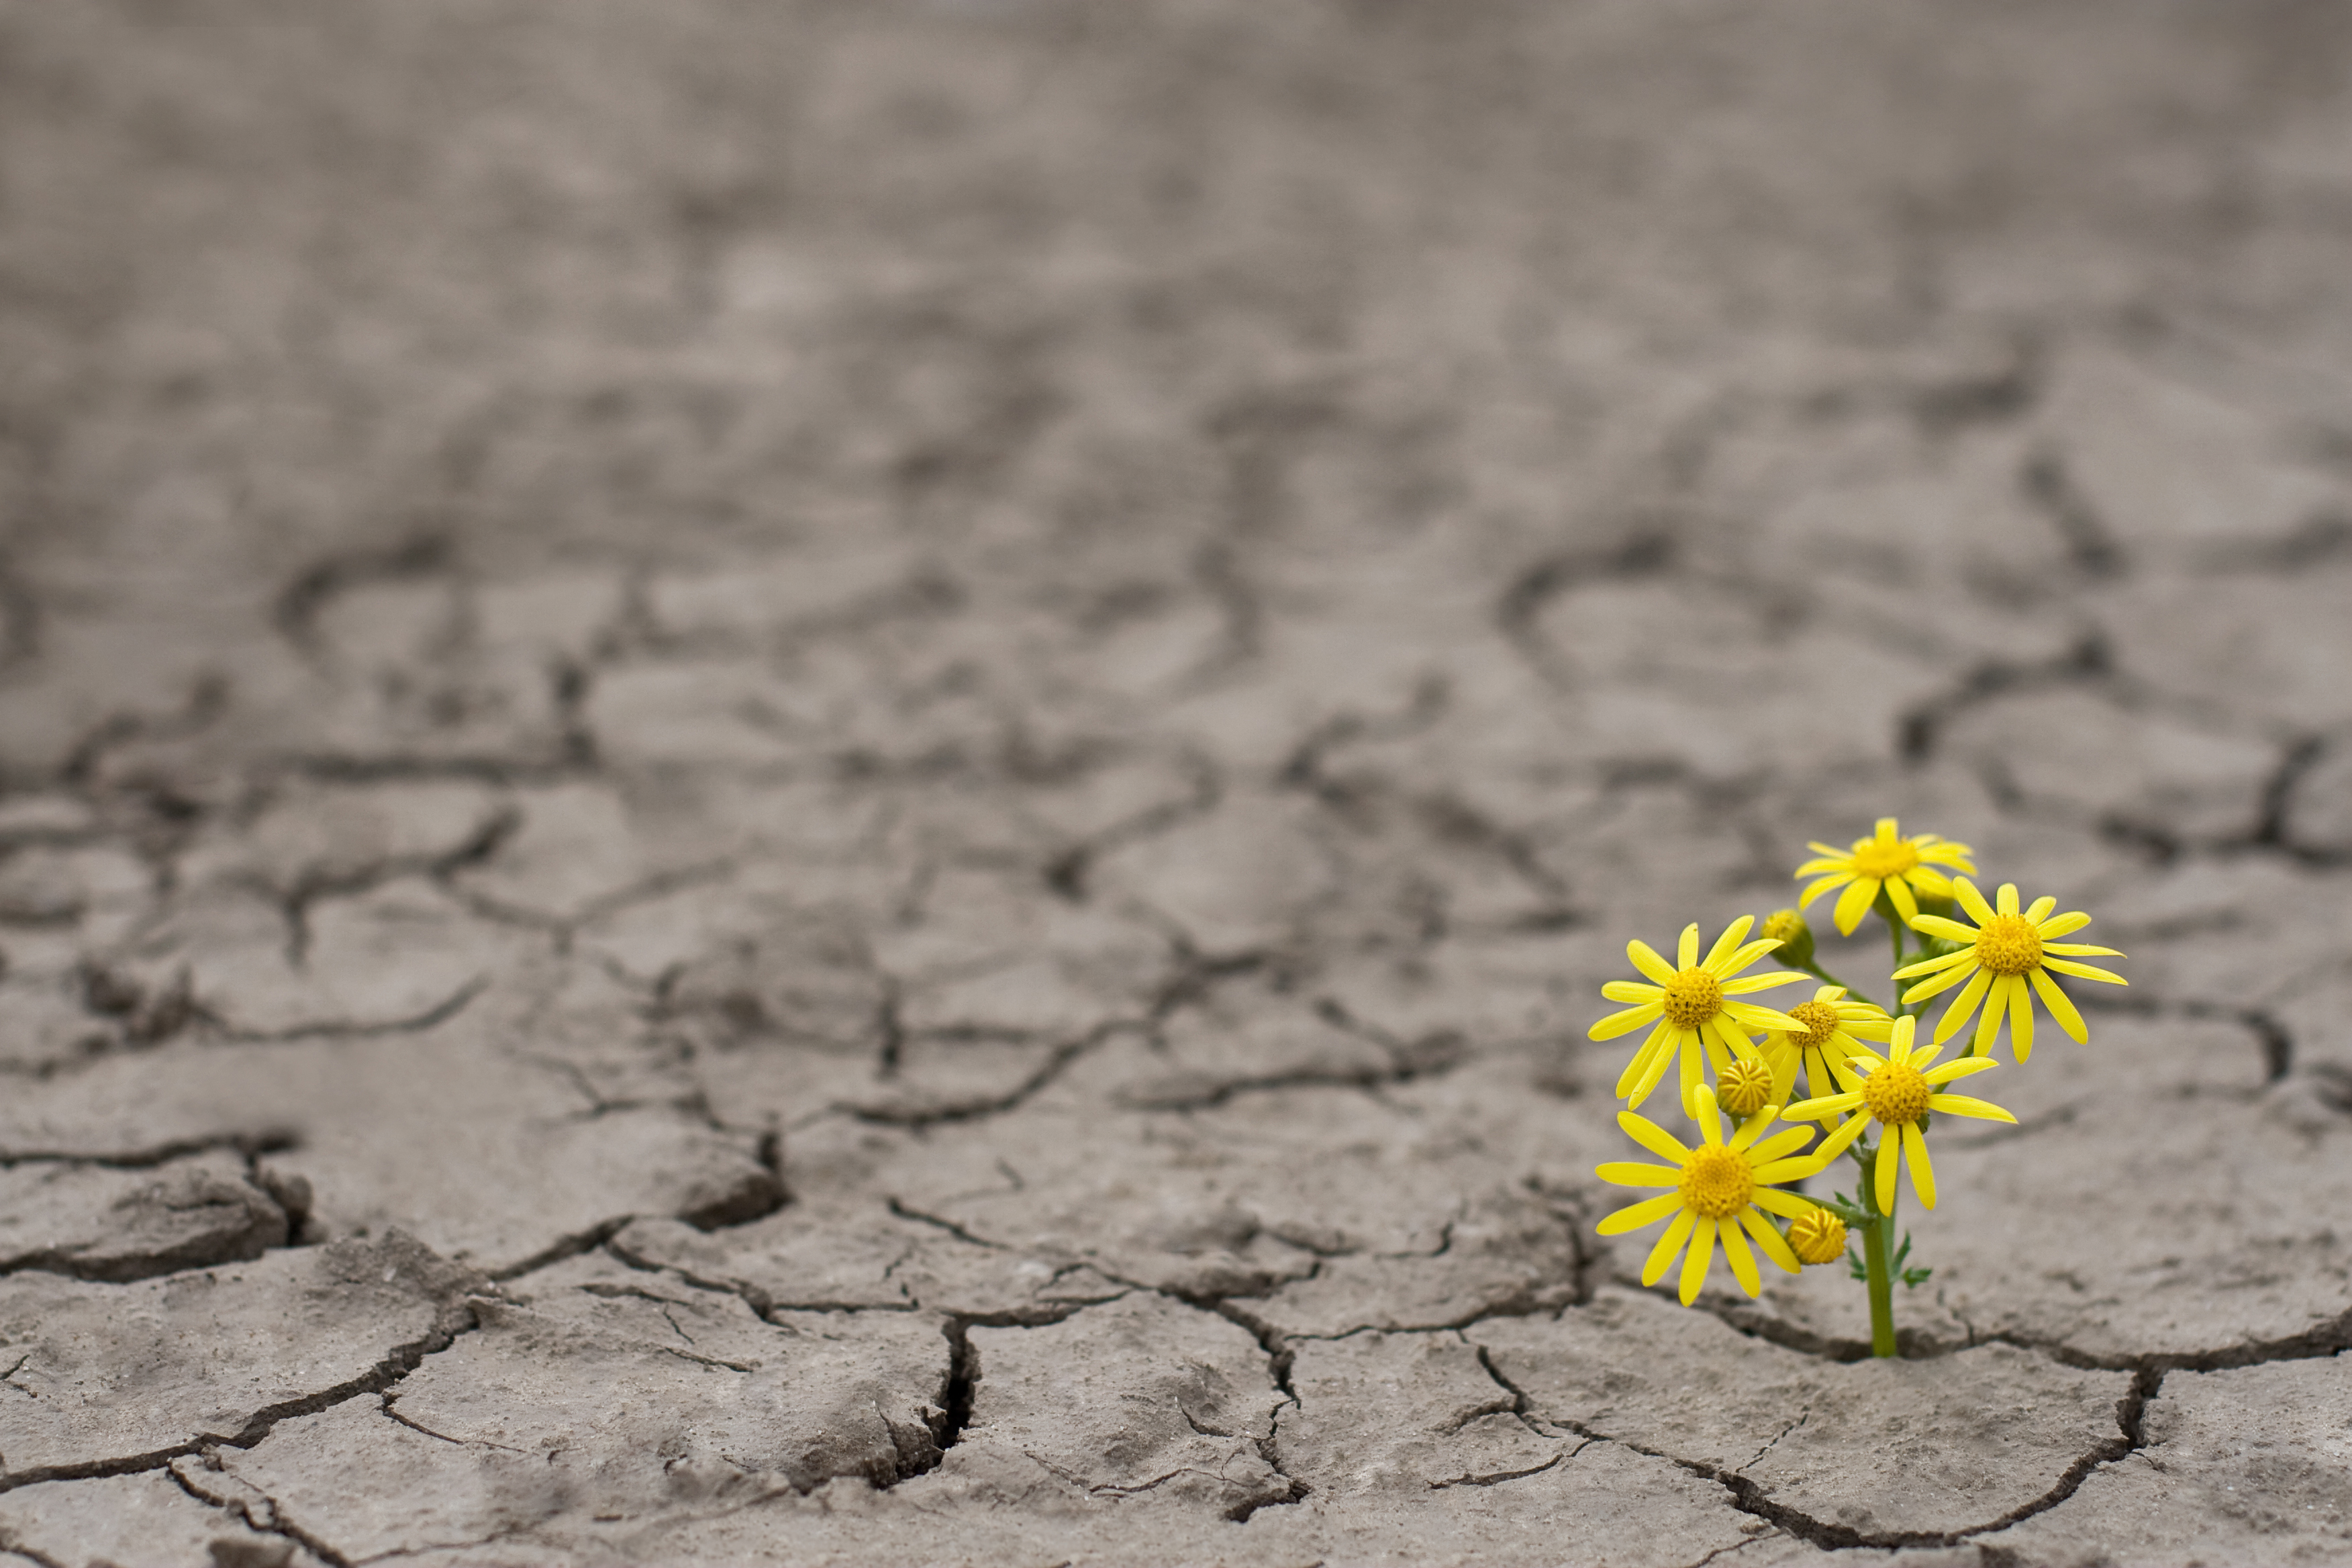 Horizontal side view of a lonely yellow flower growing on dried cracked soil; fundraising for green startups downturn